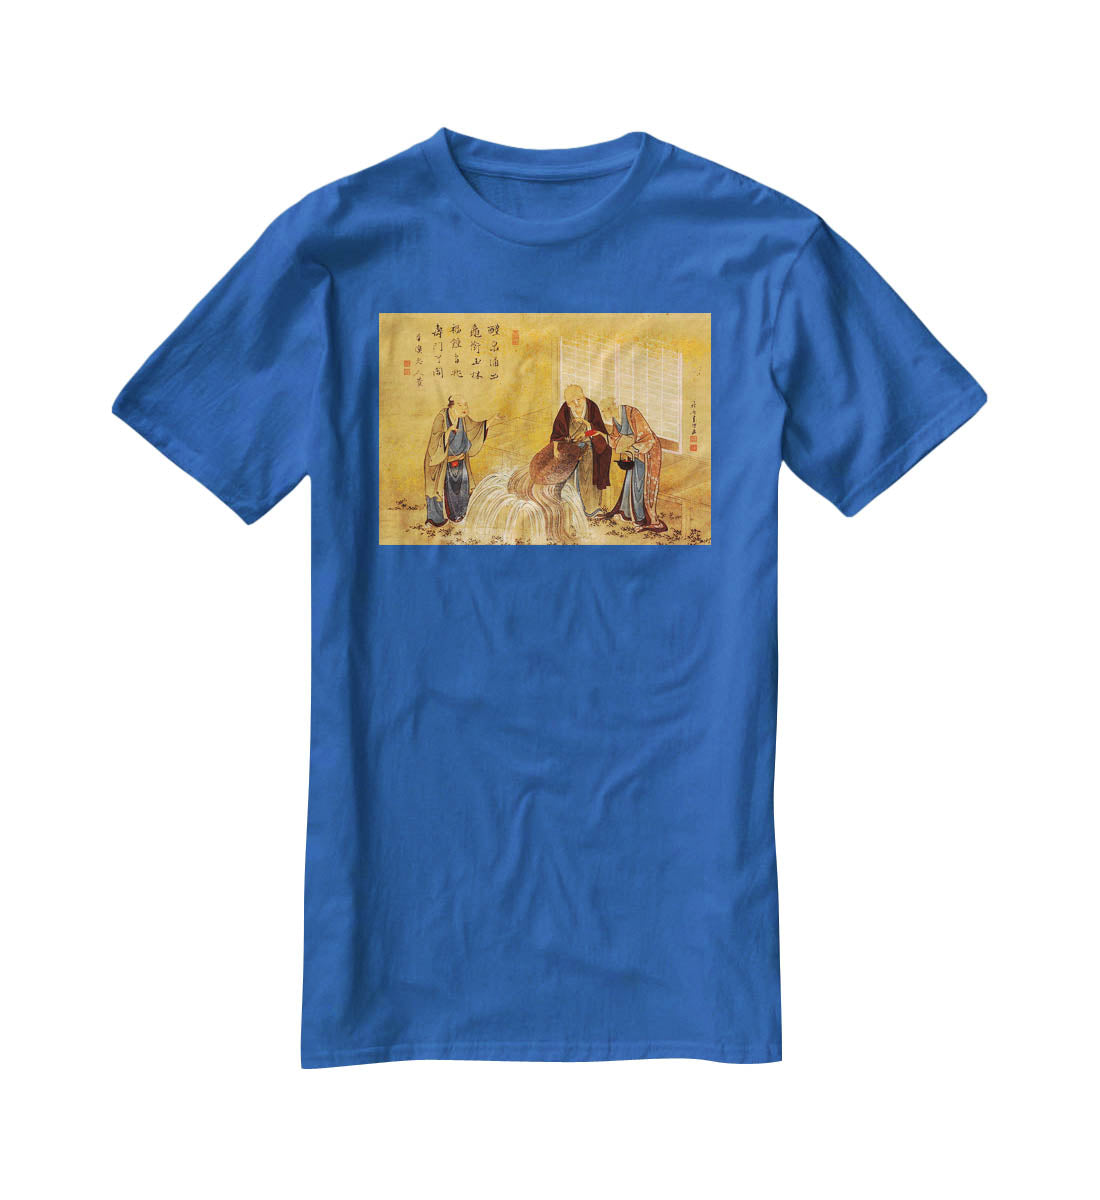 The thouthand years turtle by Hokusai T-Shirt - Canvas Art Rocks - 2